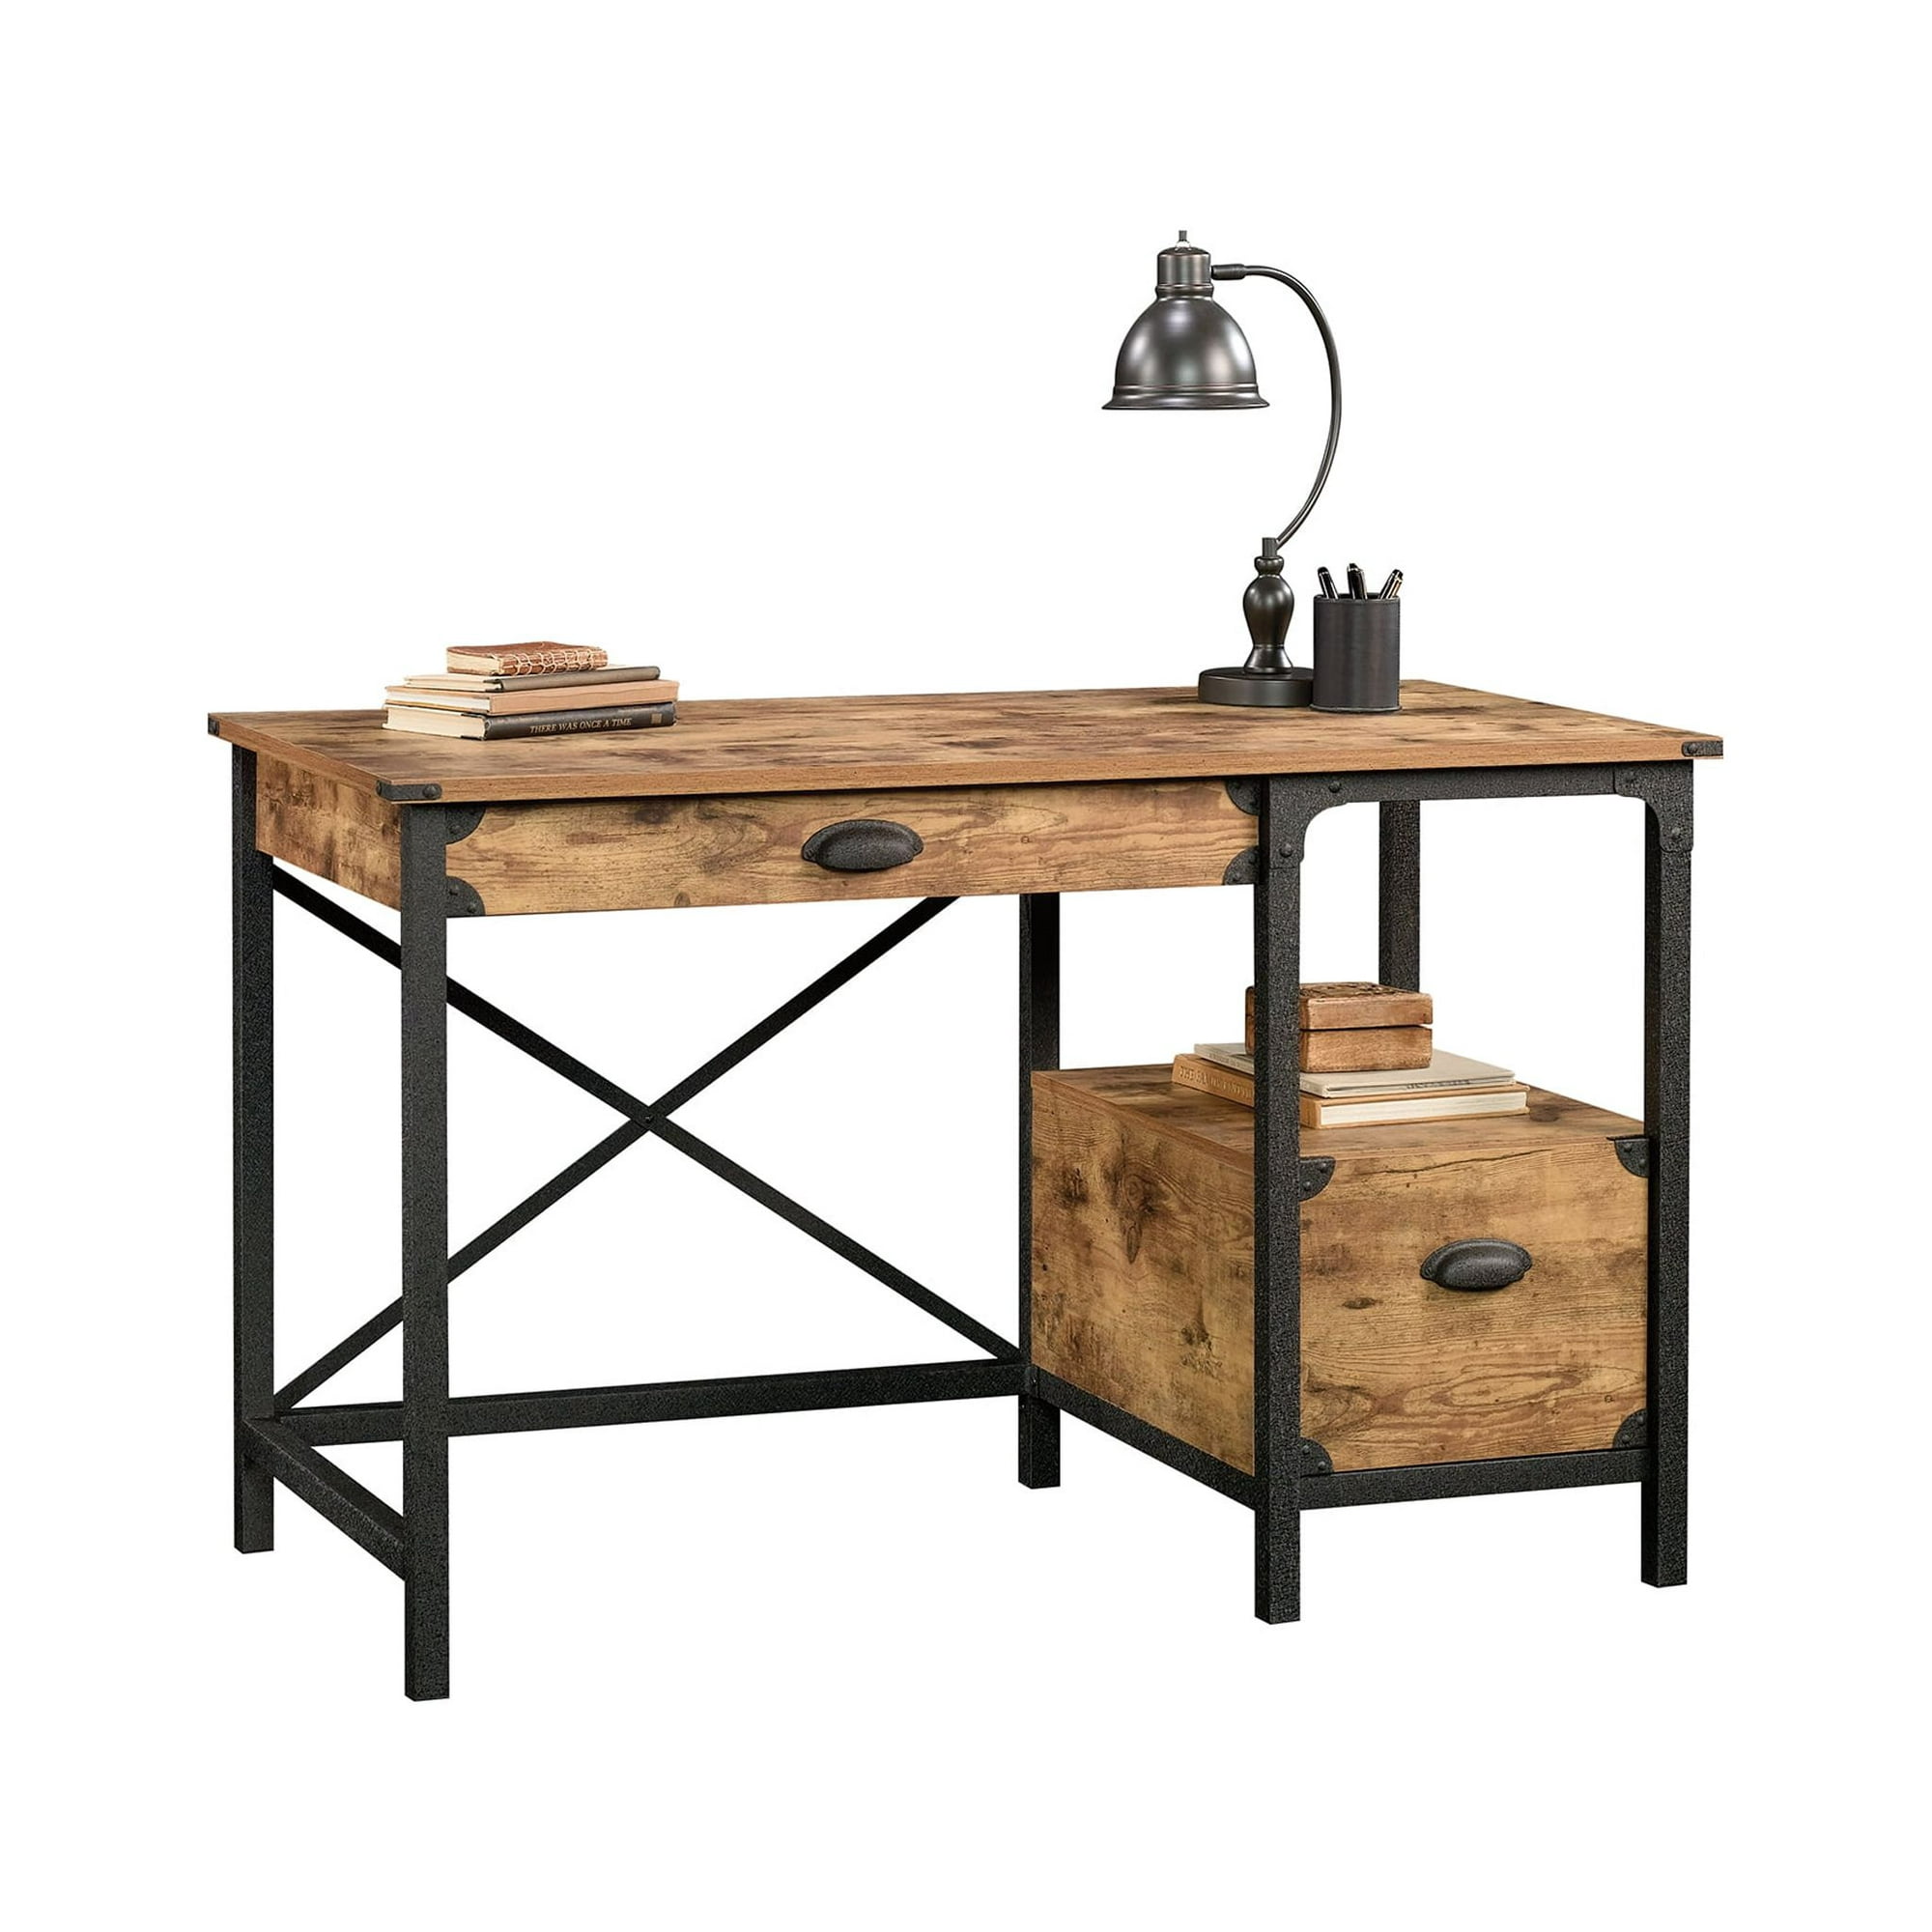 47.5" Better Homes & Gardens Rustic Country Desk (Weathered Pine Finish) $85 + Free Shipping